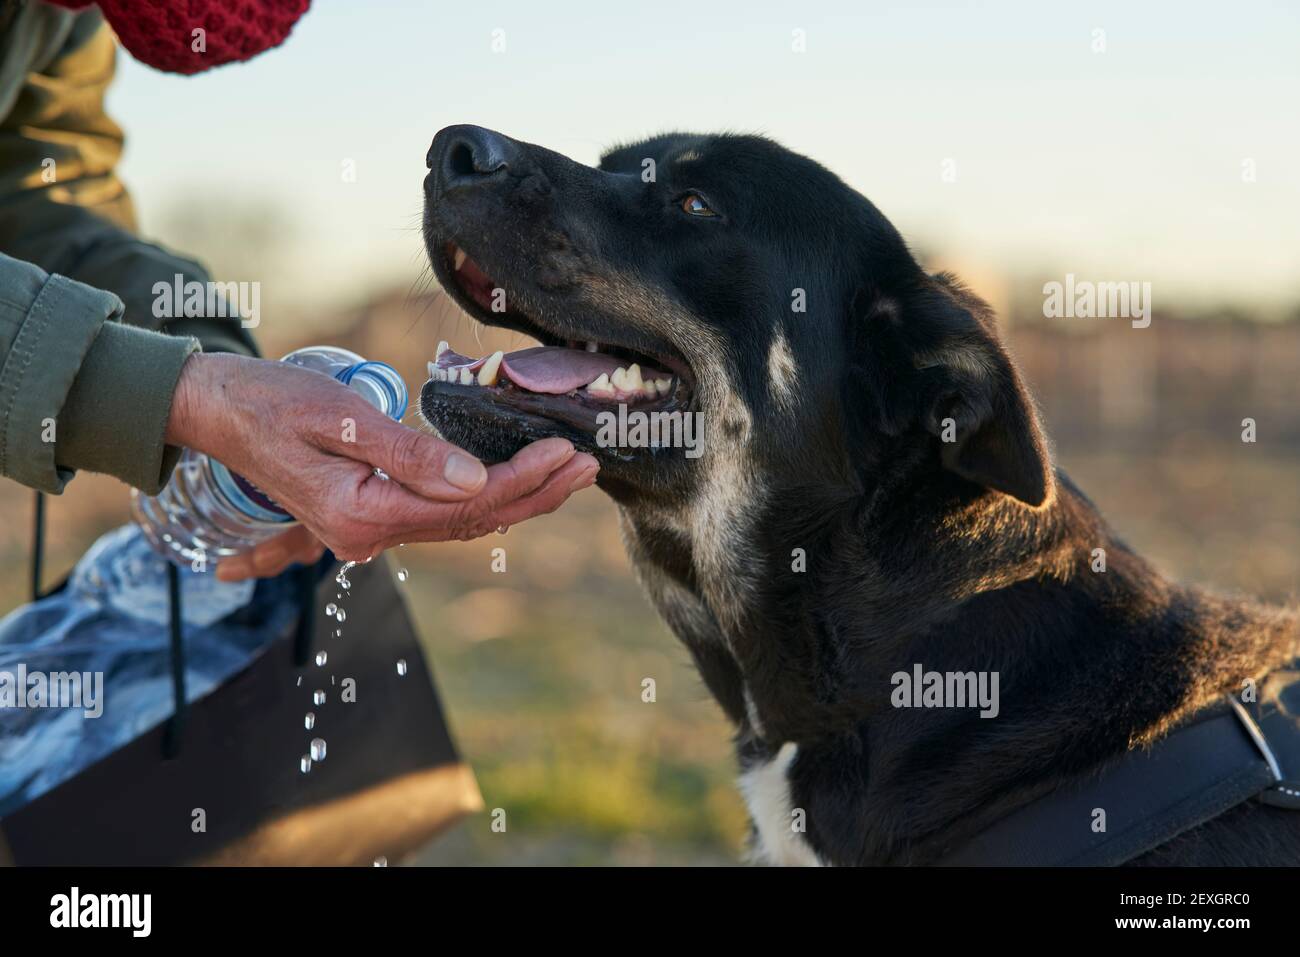 Black dog with brown and white spots drinking water from hand Stock Photo